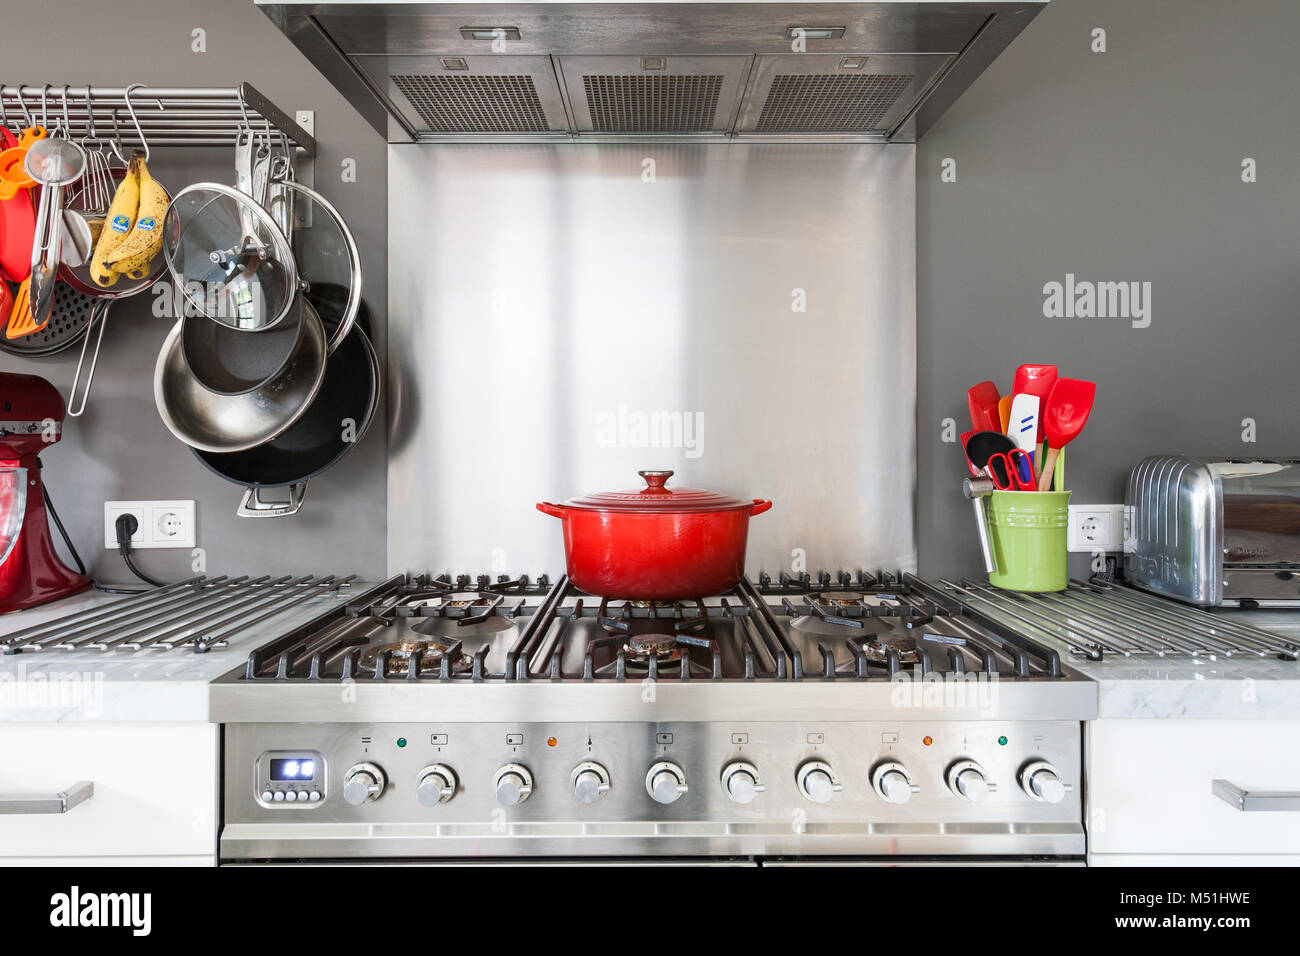 A bright red casserole dish sits atop a high end, stainless steel stove Stock Photo